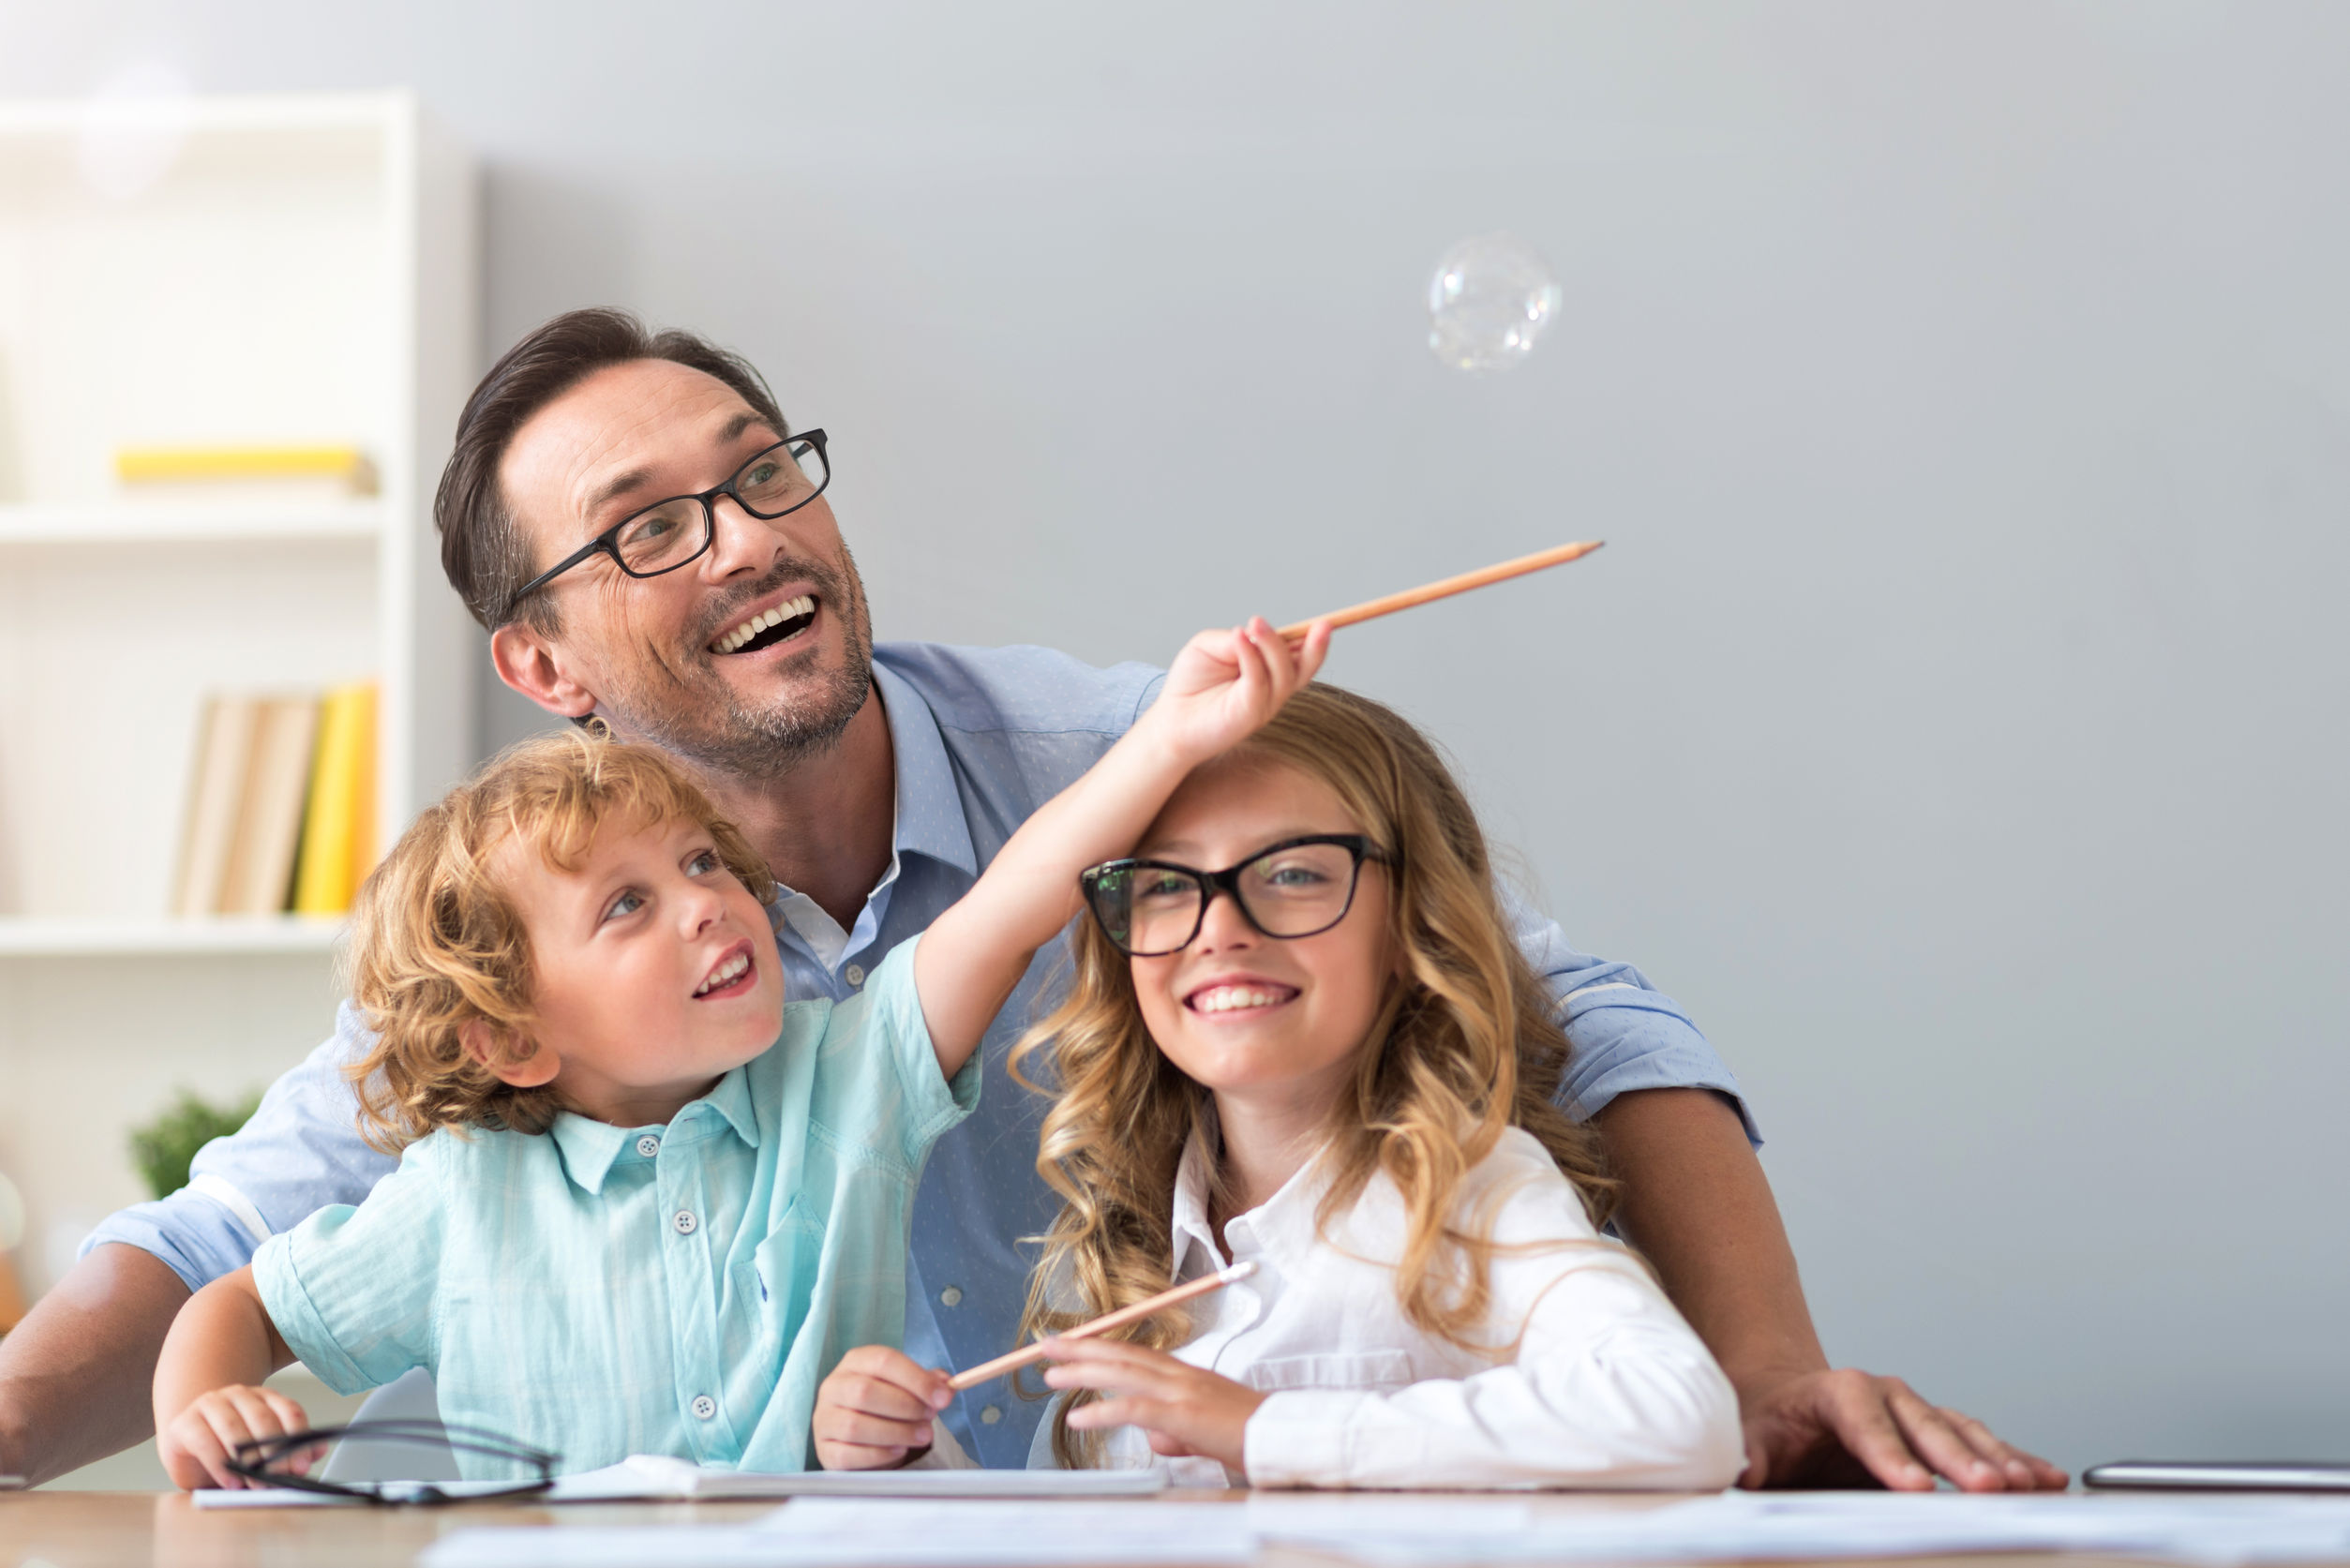 lift it higher. joyful little boy trying to catch a soap bubble with a pencil while sitting at the table with a smiling man and adorable girl